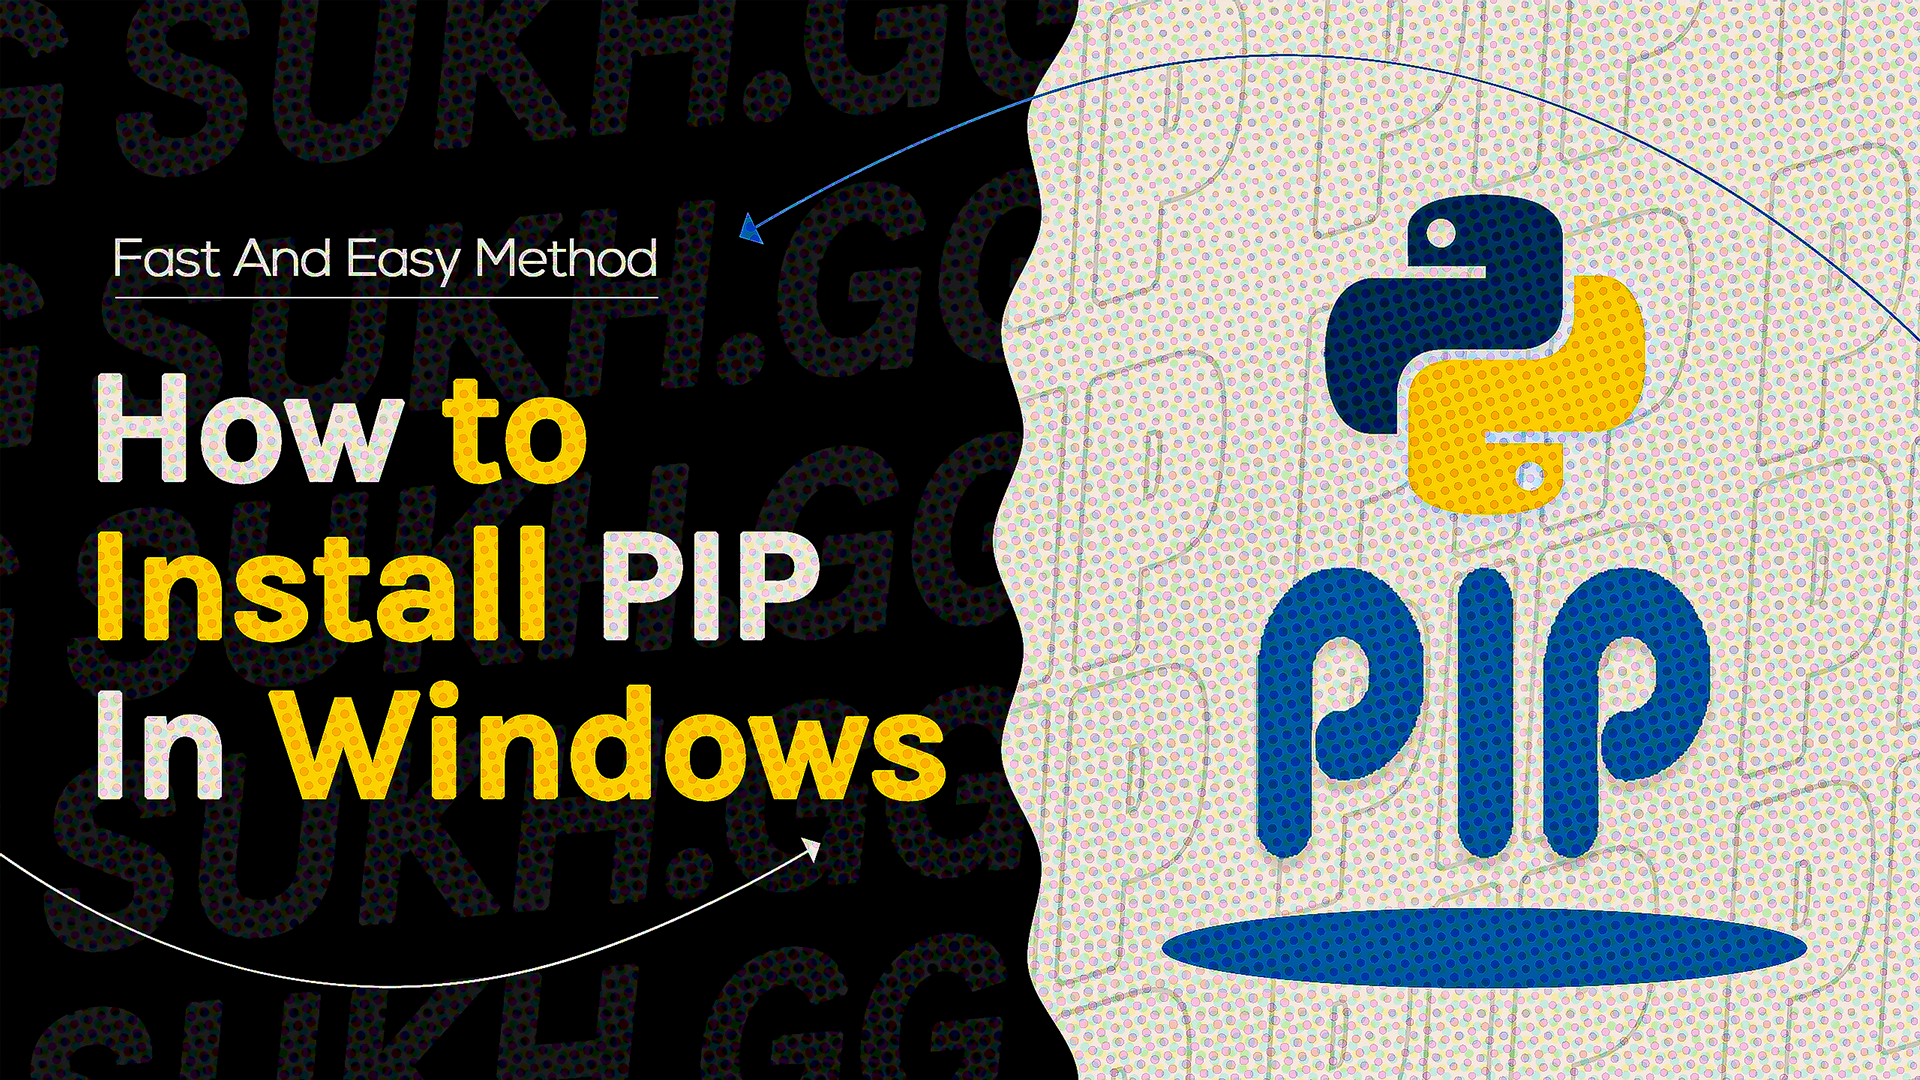 How to Install PIP in Windows